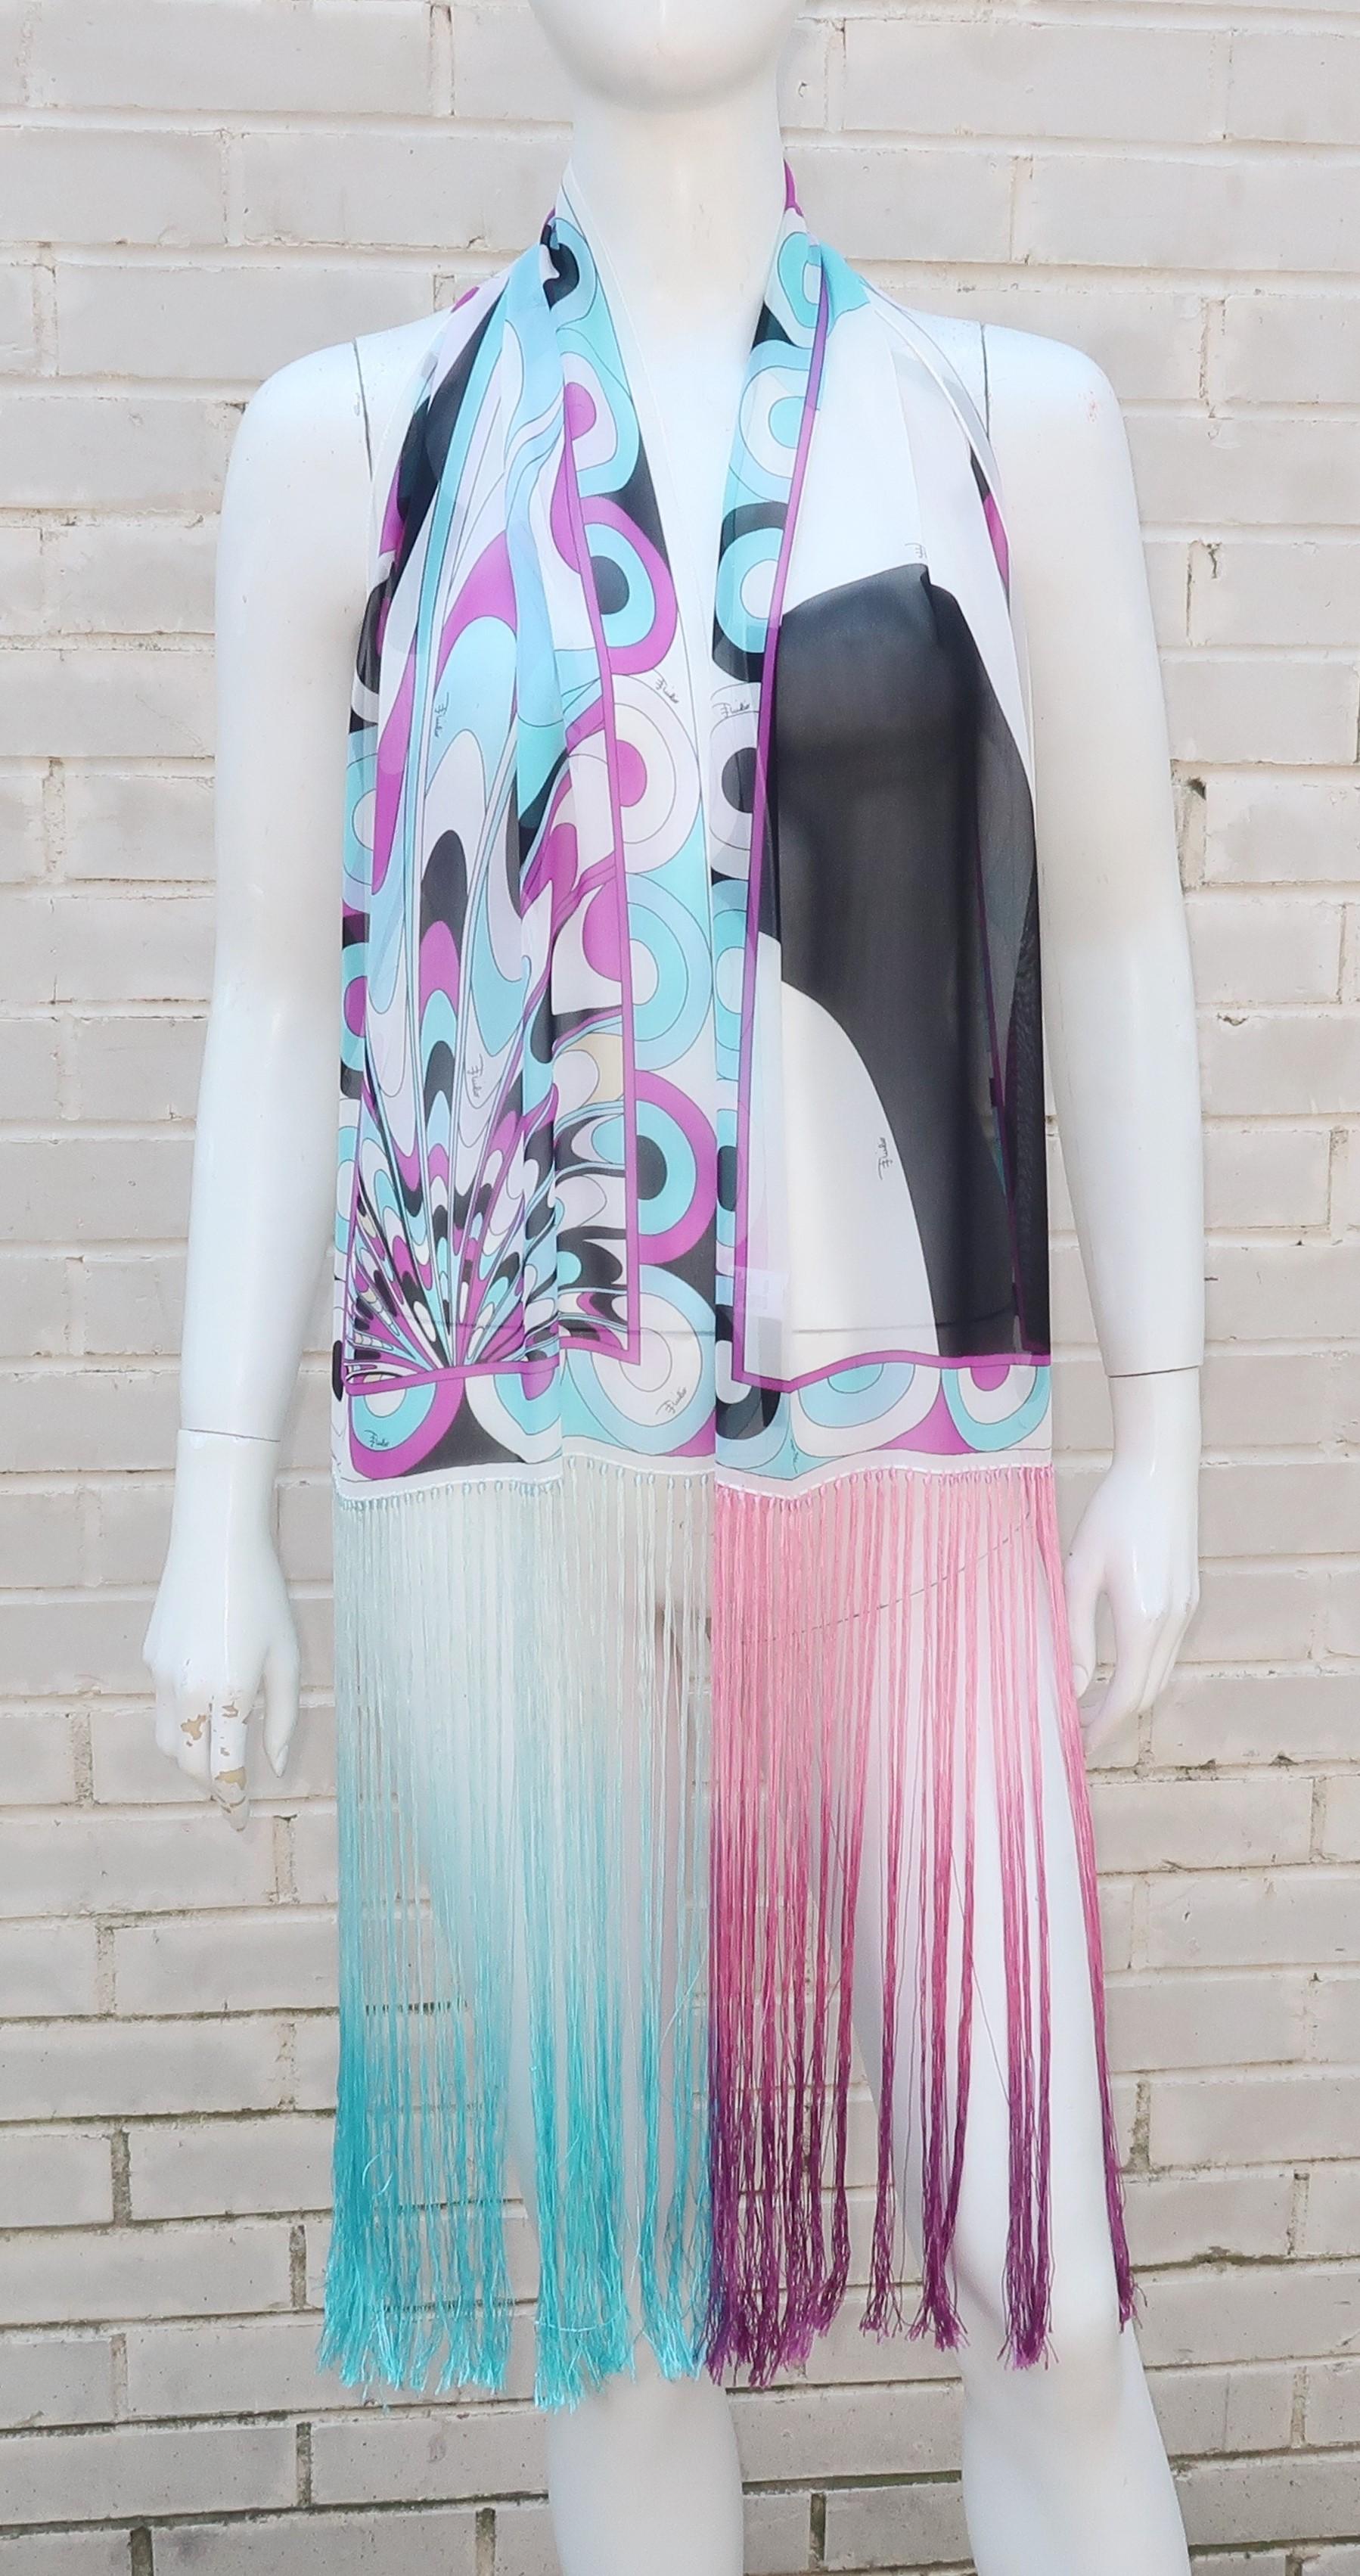 This is a fun Emilio Pucci scarf design with a great combination of an iconic psychedelic print and long boho chic fringe worthy of a rock star.  The semi sheer silk chiffon is in shades of black, white, aqua, gray and purple.  The fringe on each